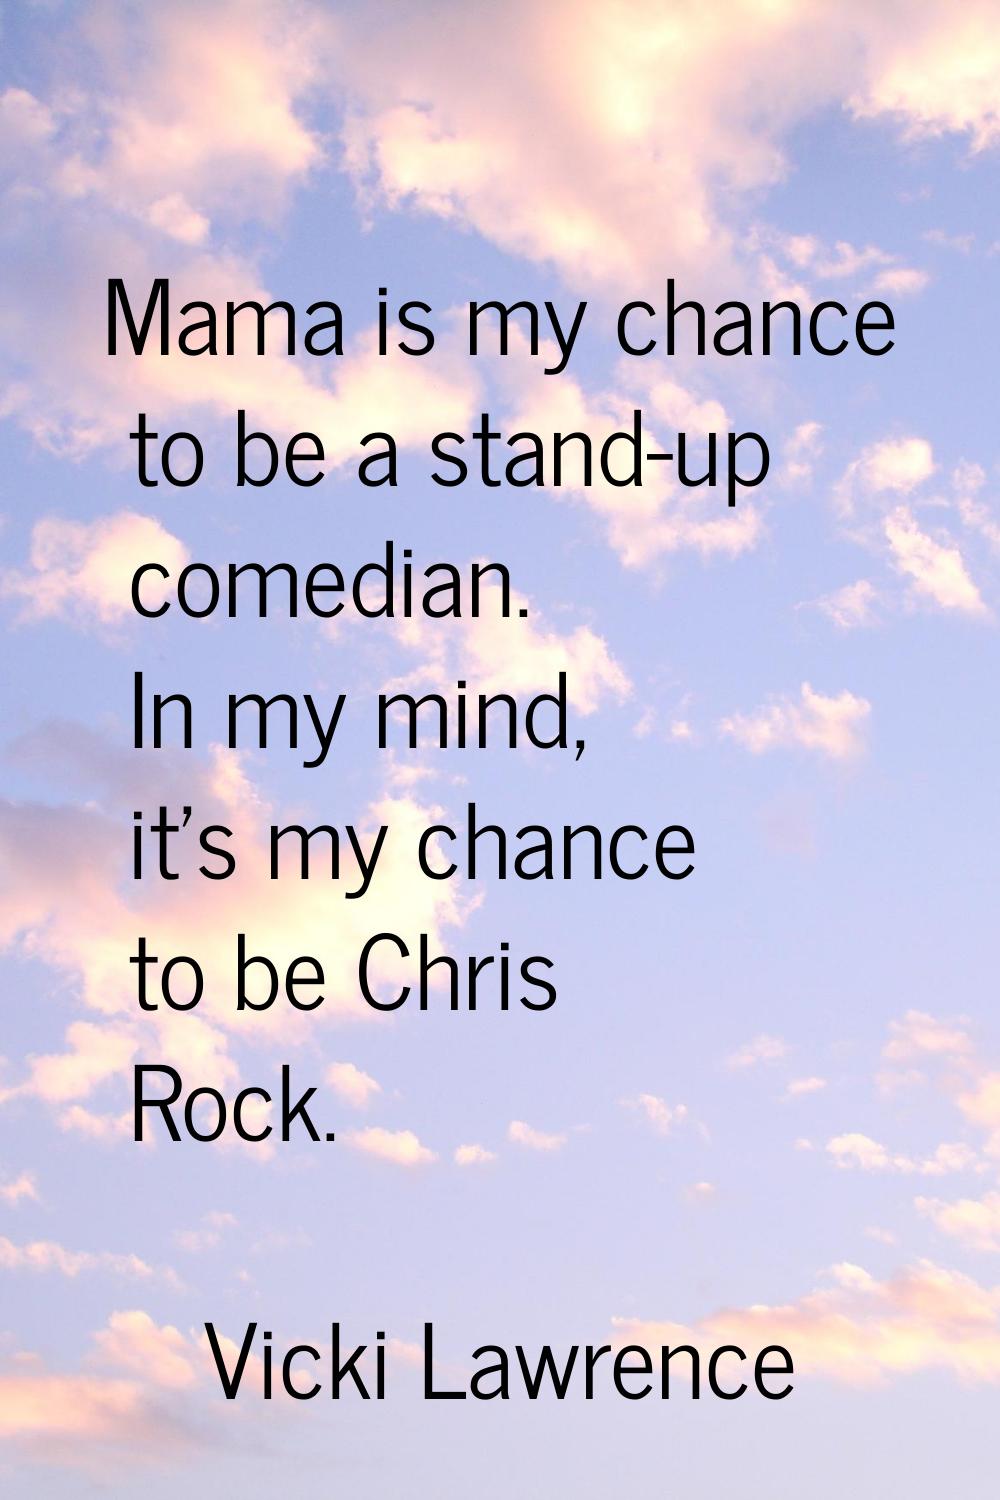 Mama is my chance to be a stand-up comedian. In my mind, it's my chance to be Chris Rock.